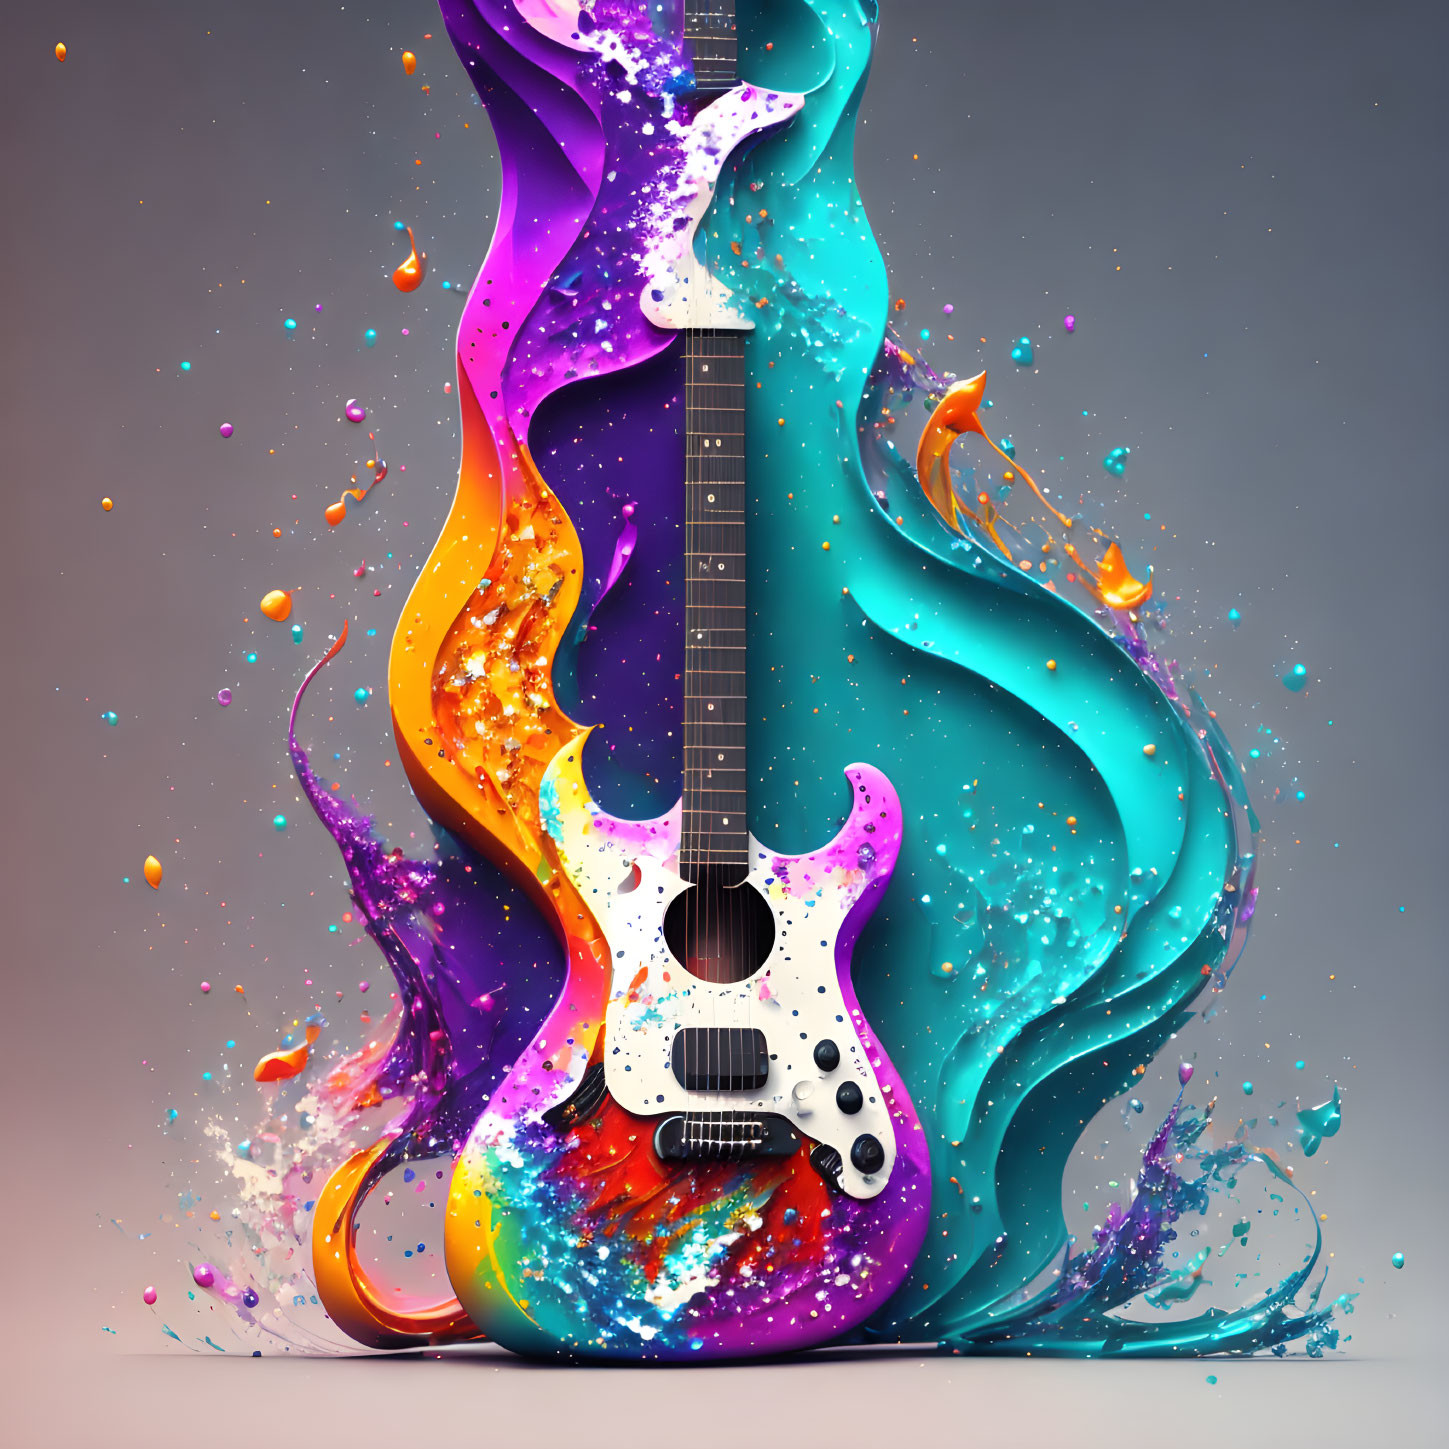 Vibrant paint splashes merge with electric guitar on neutral backdrop